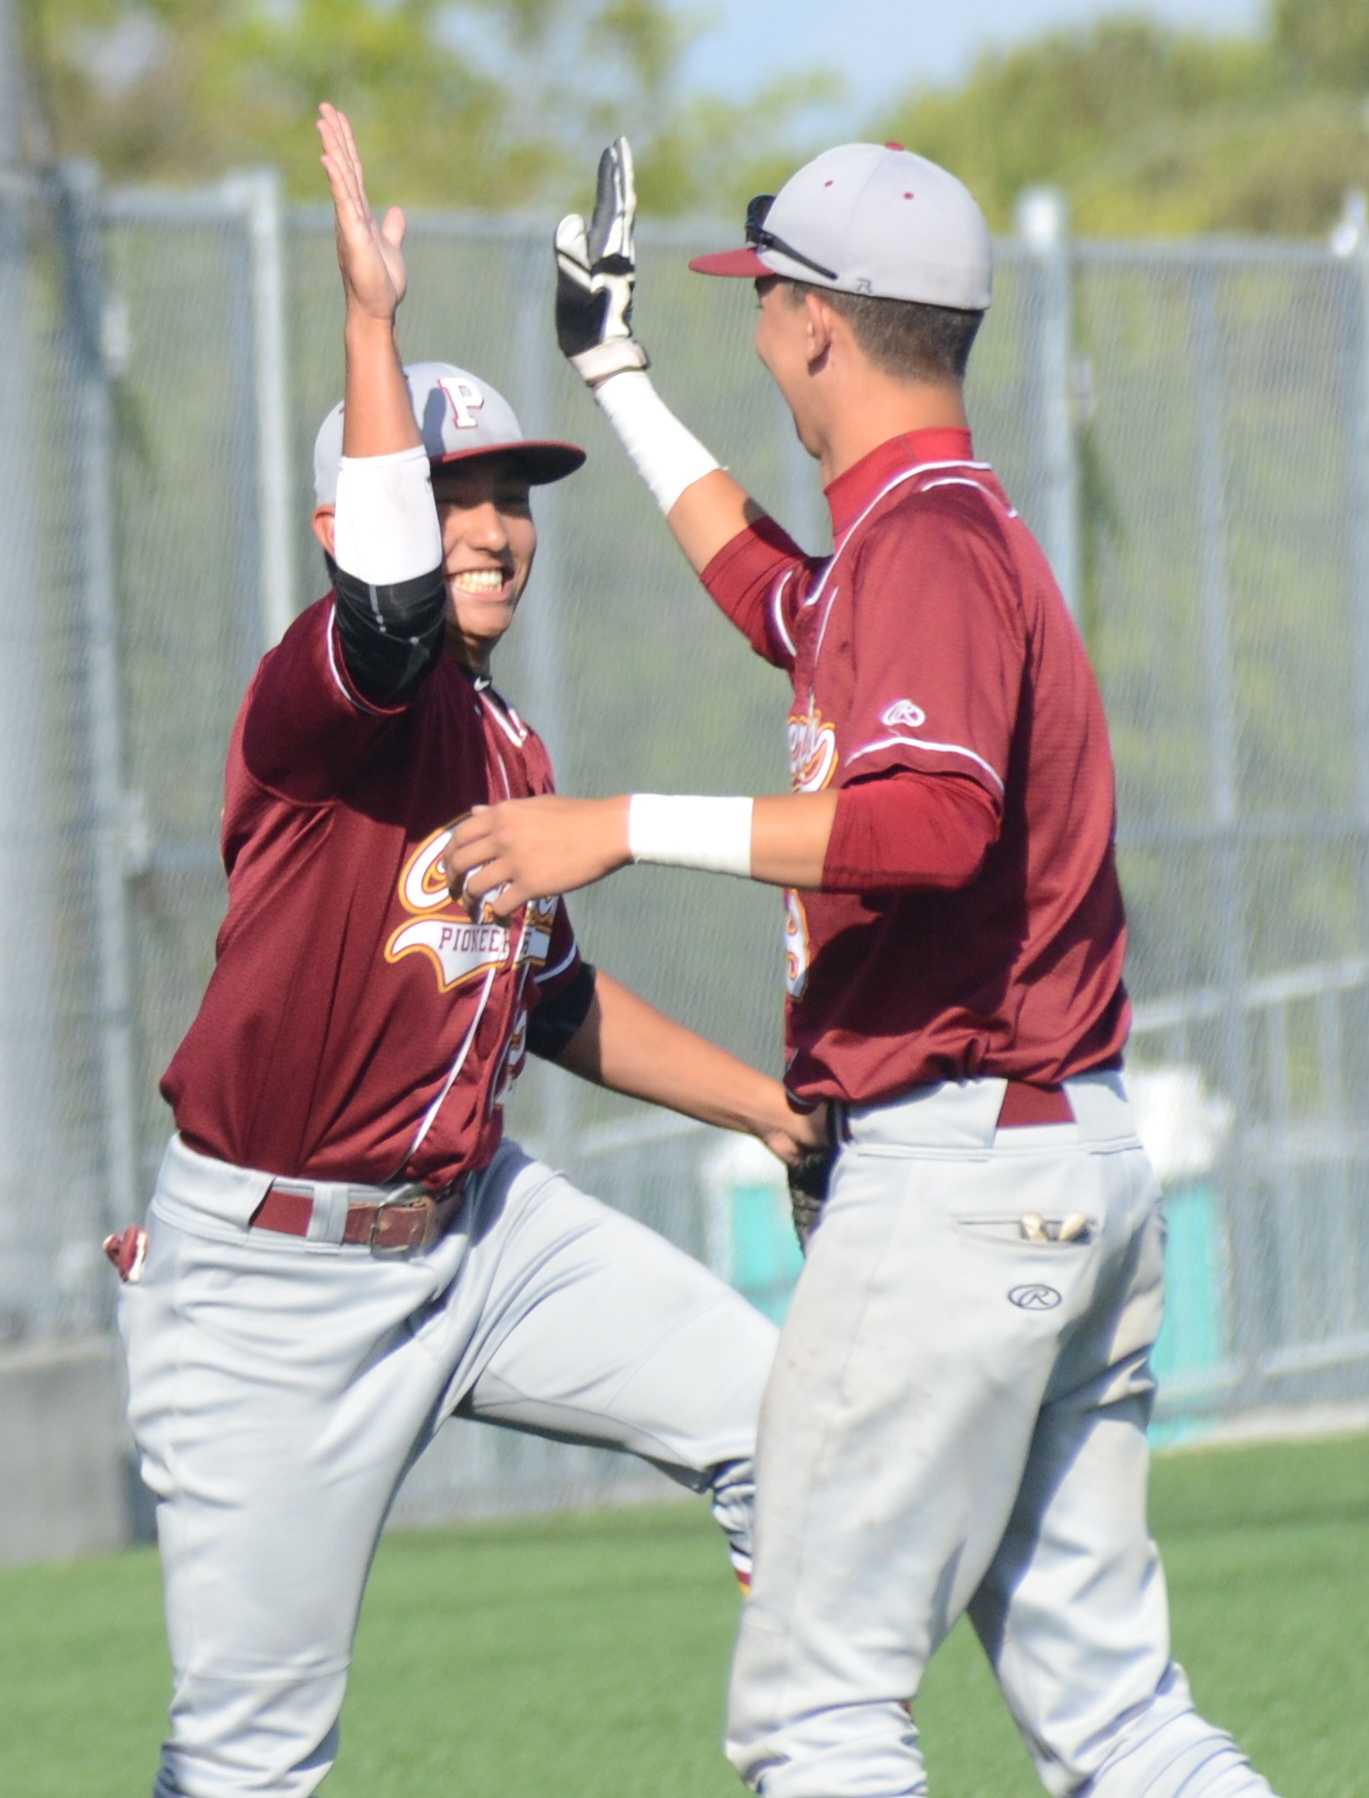 After securing the win, two Pioneer teammates celebrate with each other. It was a big win for them in terms of the rivalry and CCS and league implications. Photo by Pranav Iyer. 